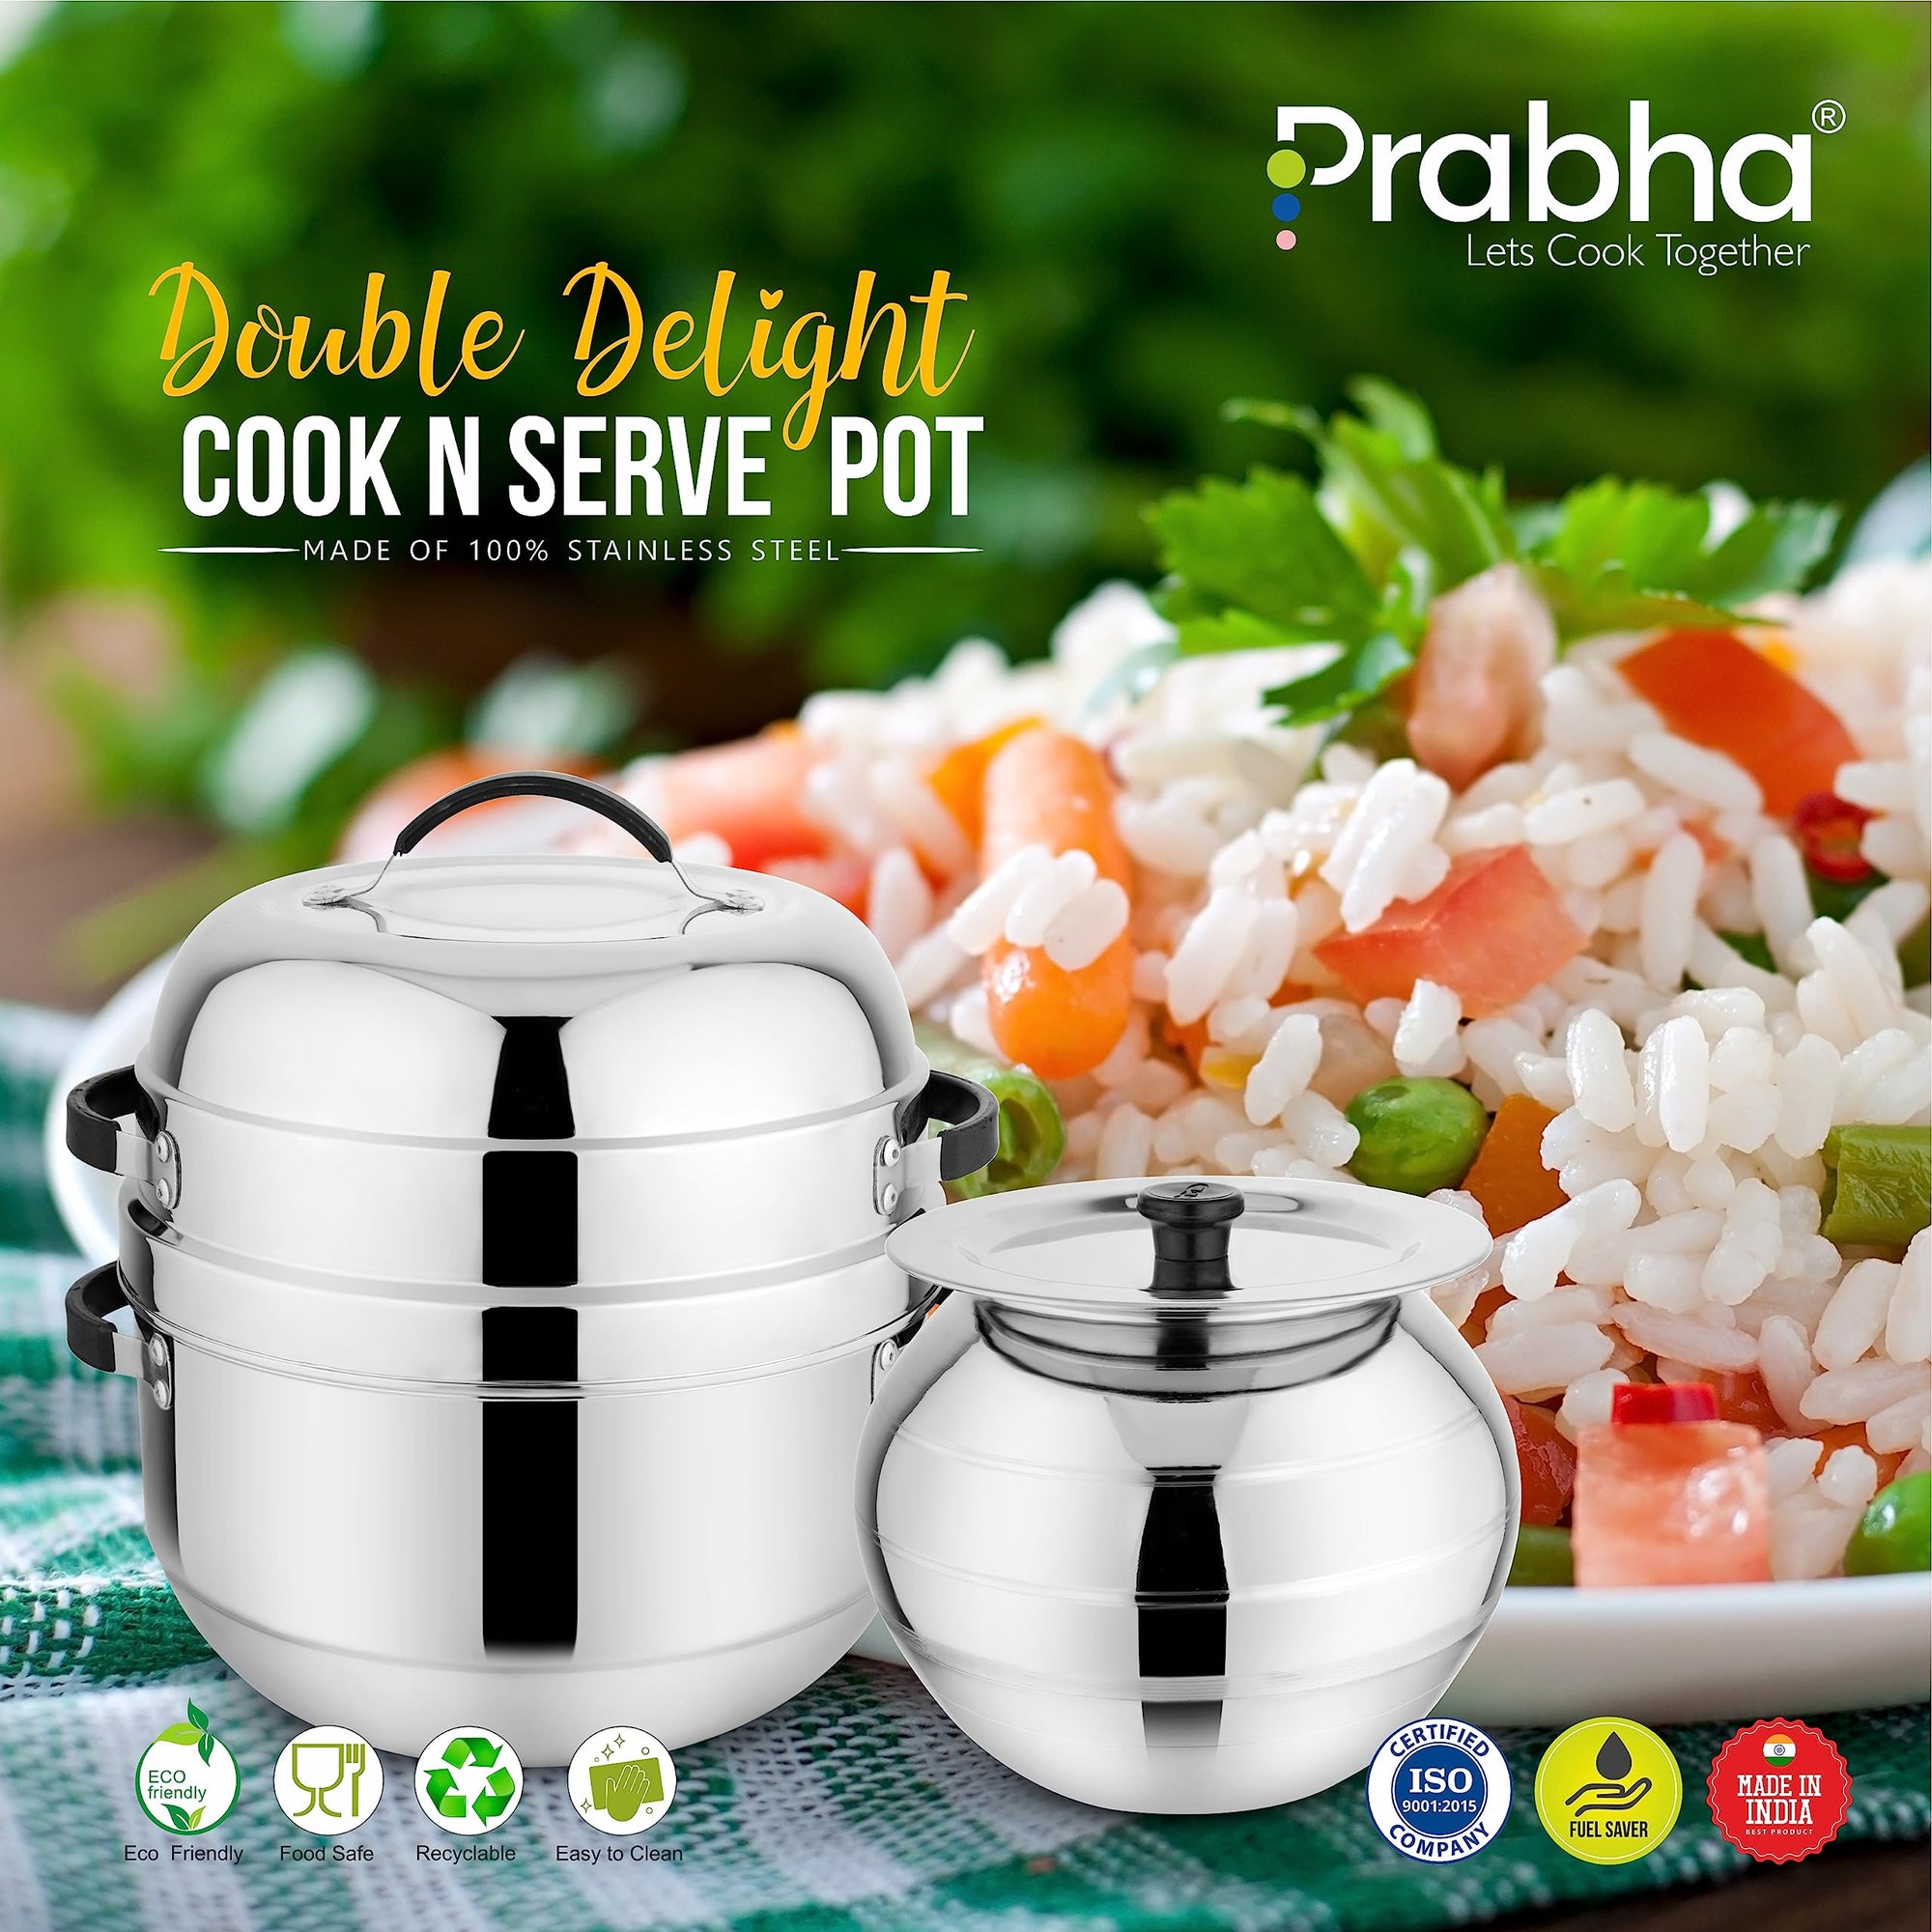 Prabha Stainless Steel Thermal Rice Cooker - Efficient 1Kg Capacity, Thermal Heating, Gas Stove Compatible, Serving Pot, 1-Year Warranty